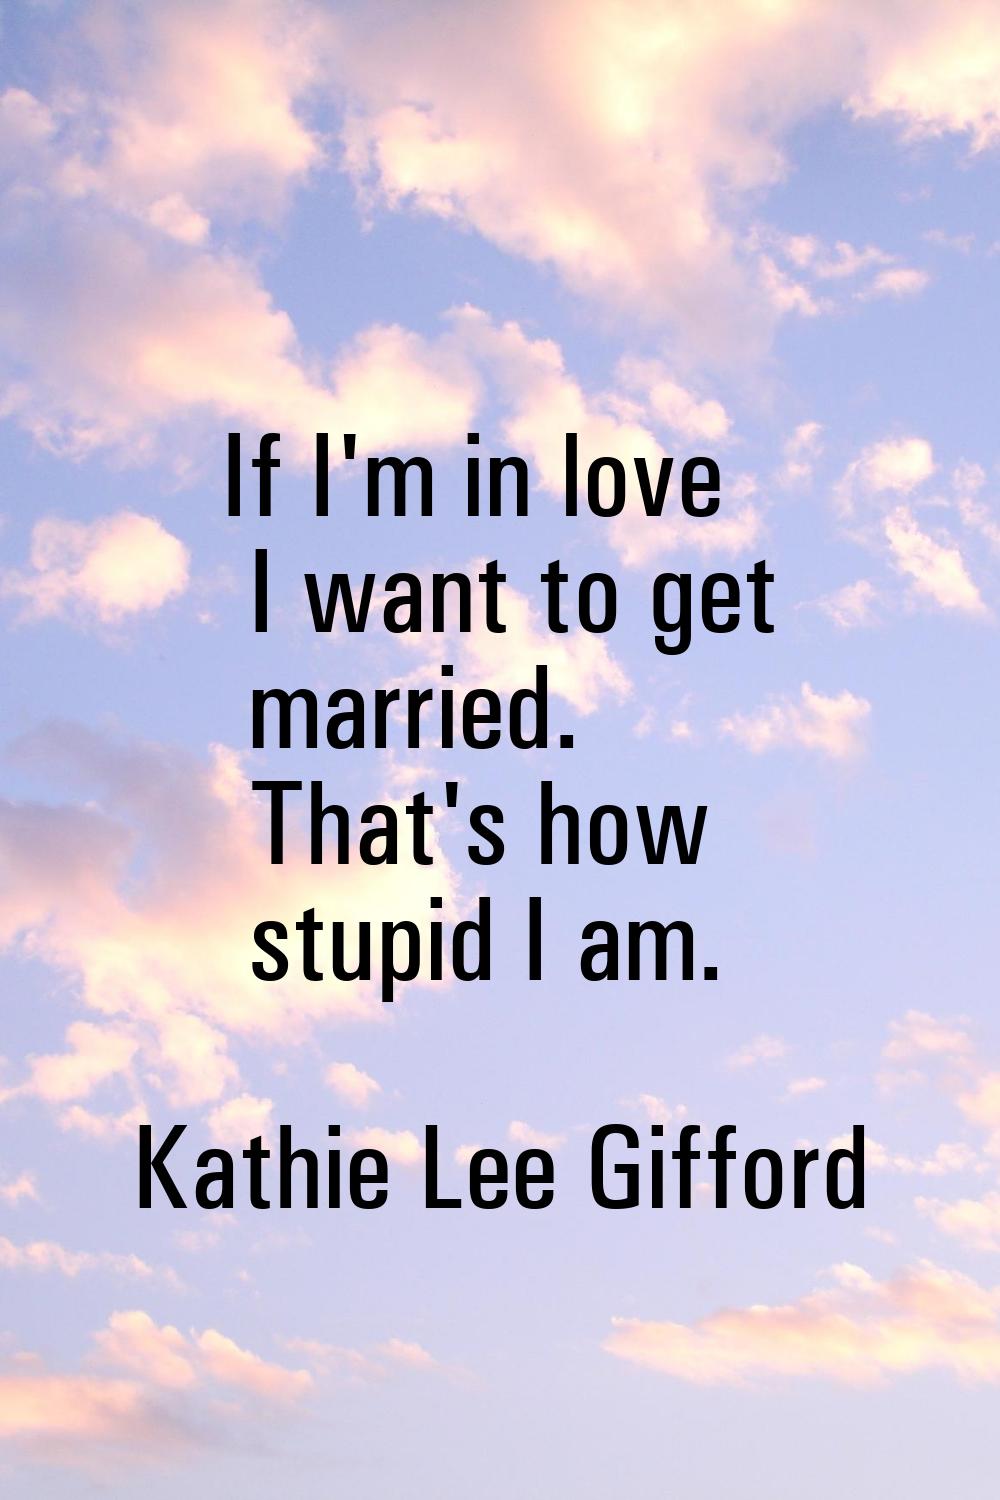 If I'm in love I want to get married. That's how stupid I am.